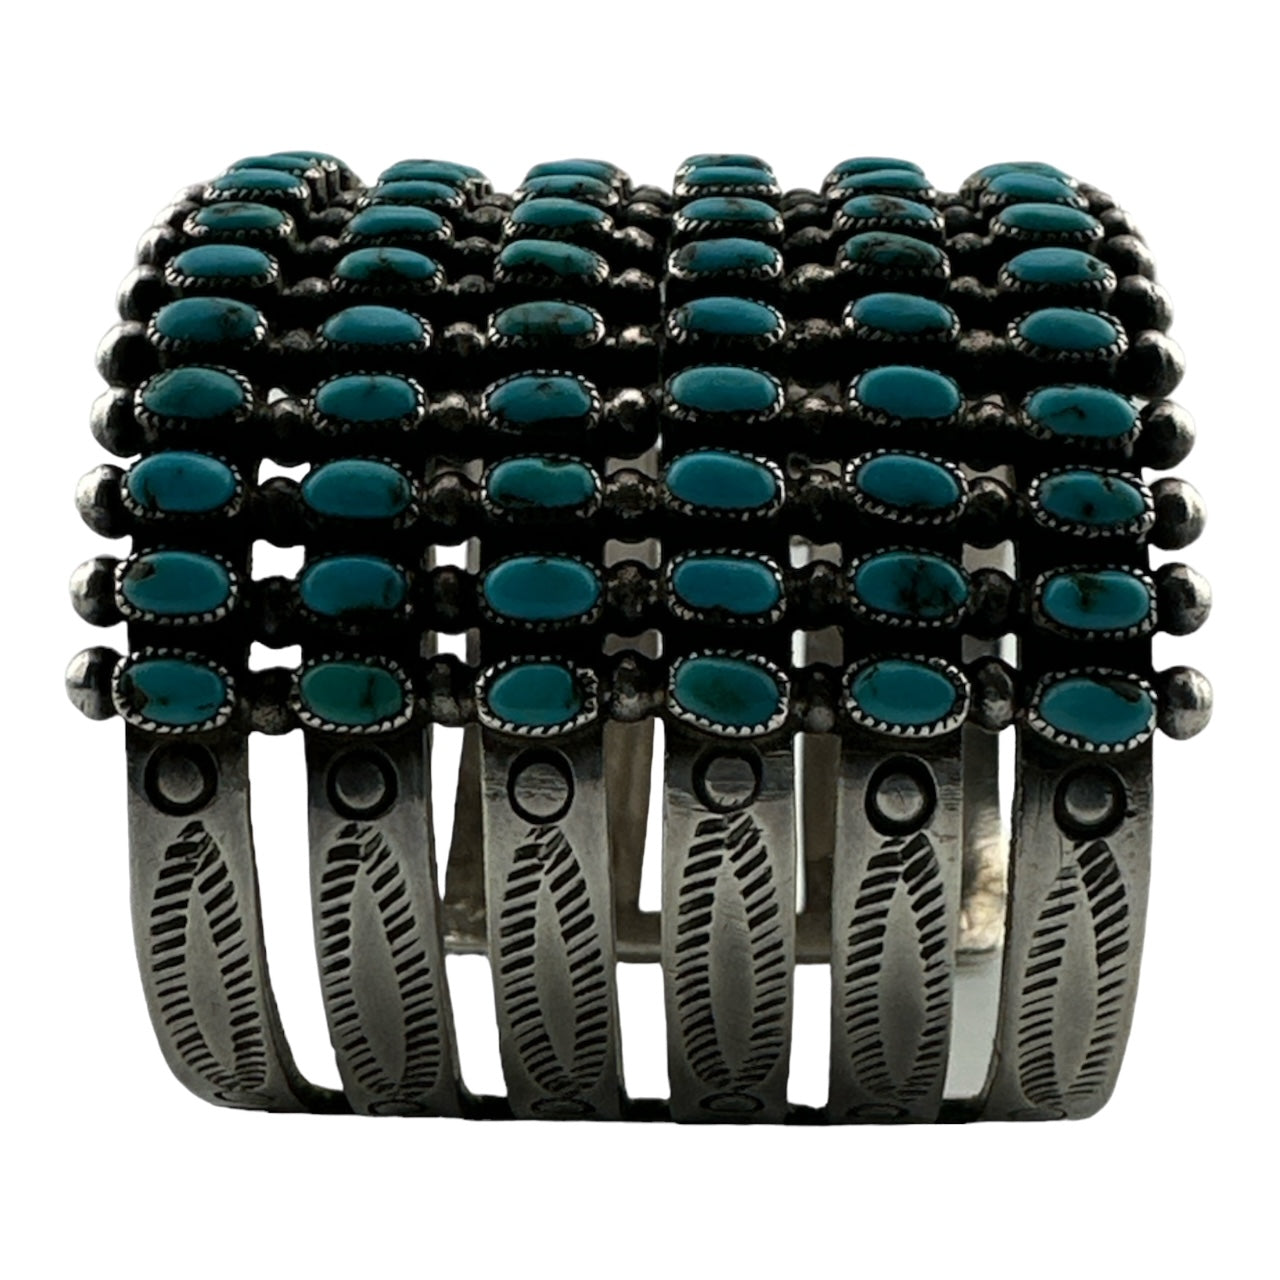 Vintage Zuni 6 Row Oval Turquoise Bracelet, turquoise jewelry for sale, telluride jewelry store, telluride gallery 